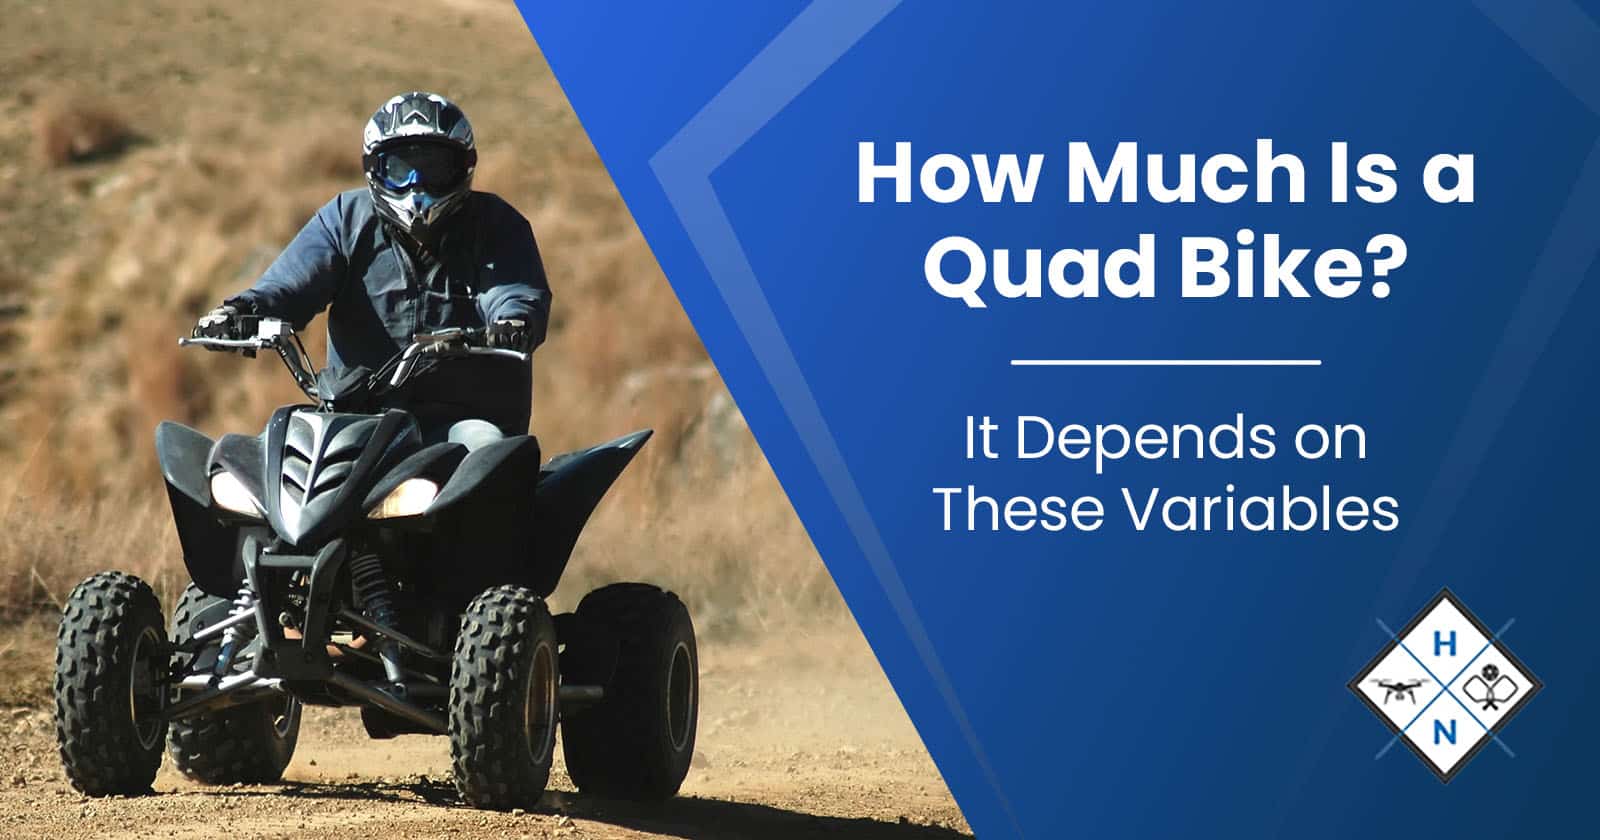 How Much Is a Quad Bike? It Depends on These Variables